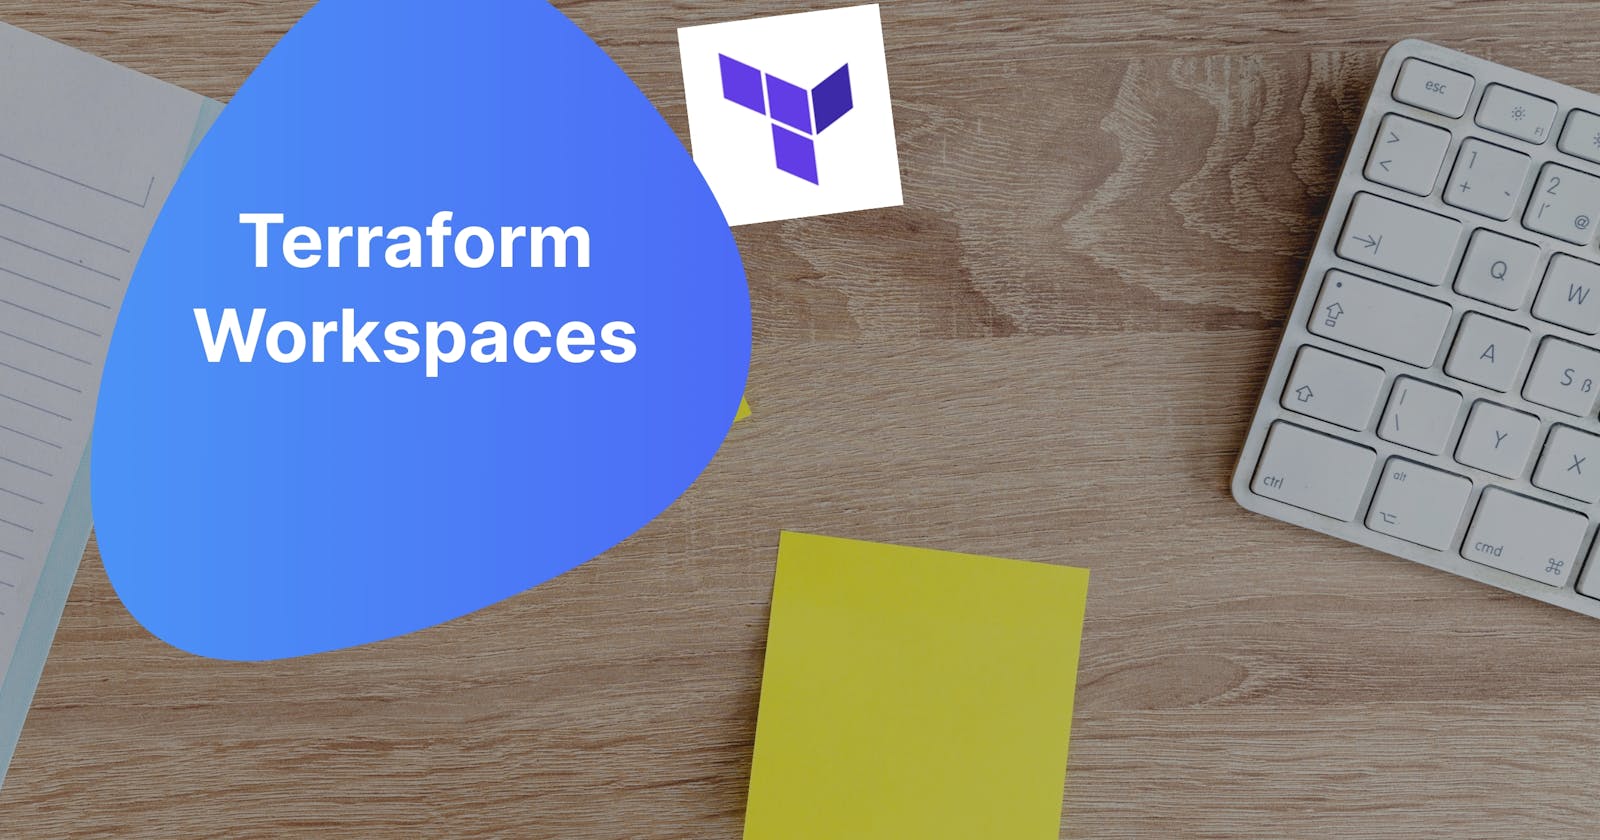 Terraform Workspaces with a simple example use case.